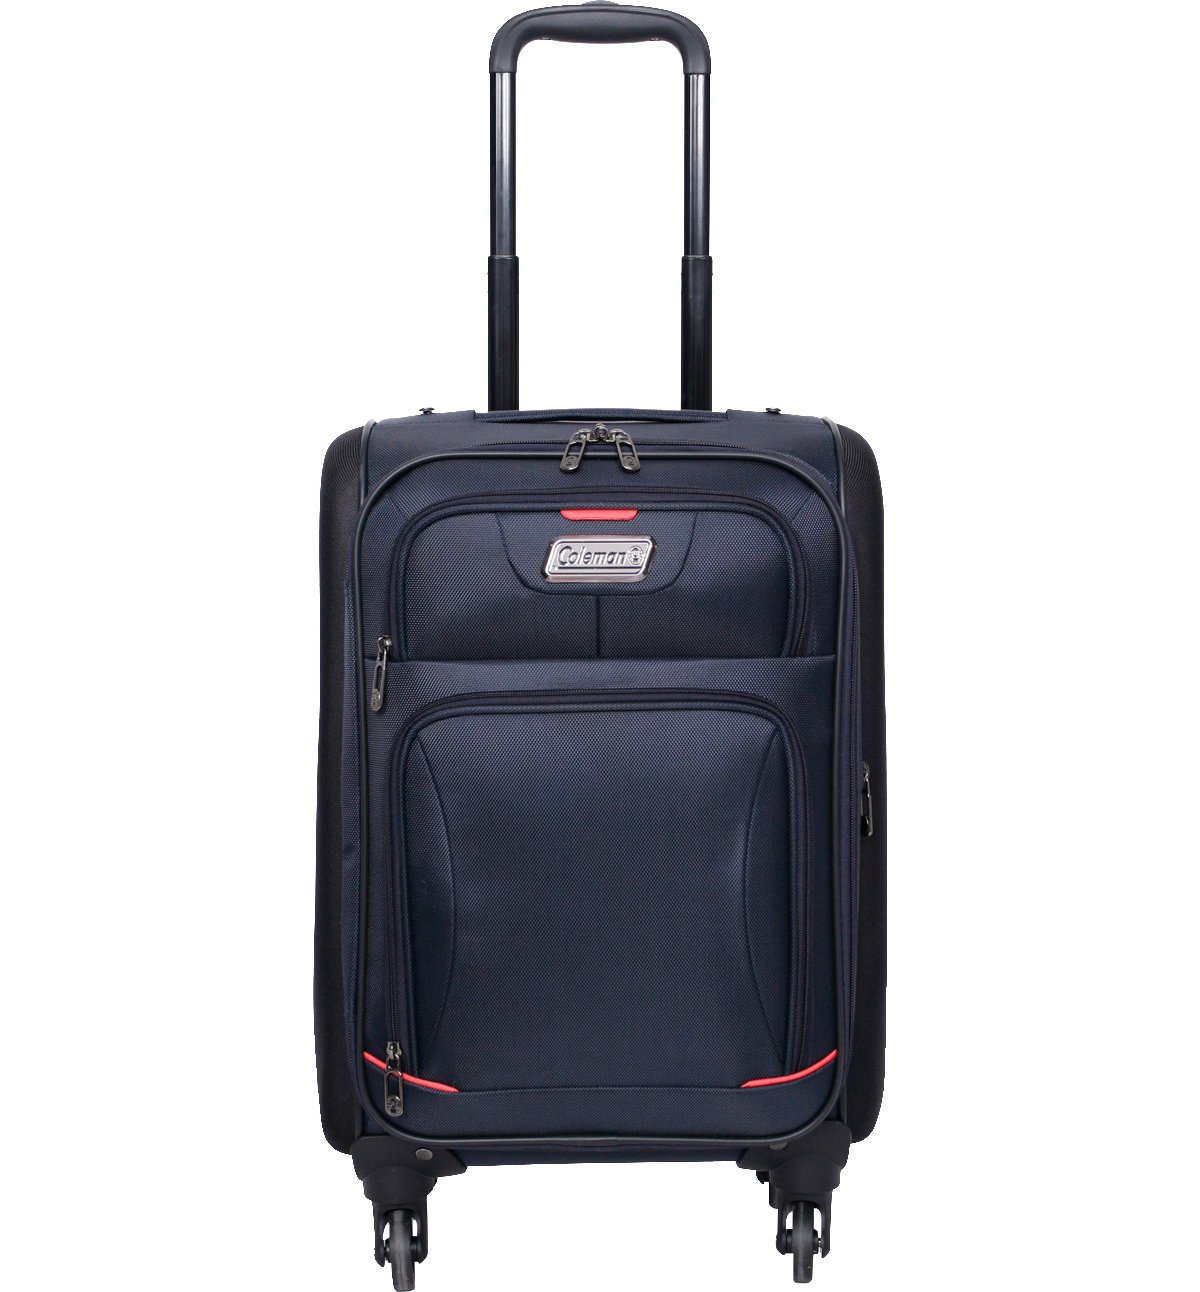 Coleman 20 in Emporia Molded Soft-Side Upright Suitcase